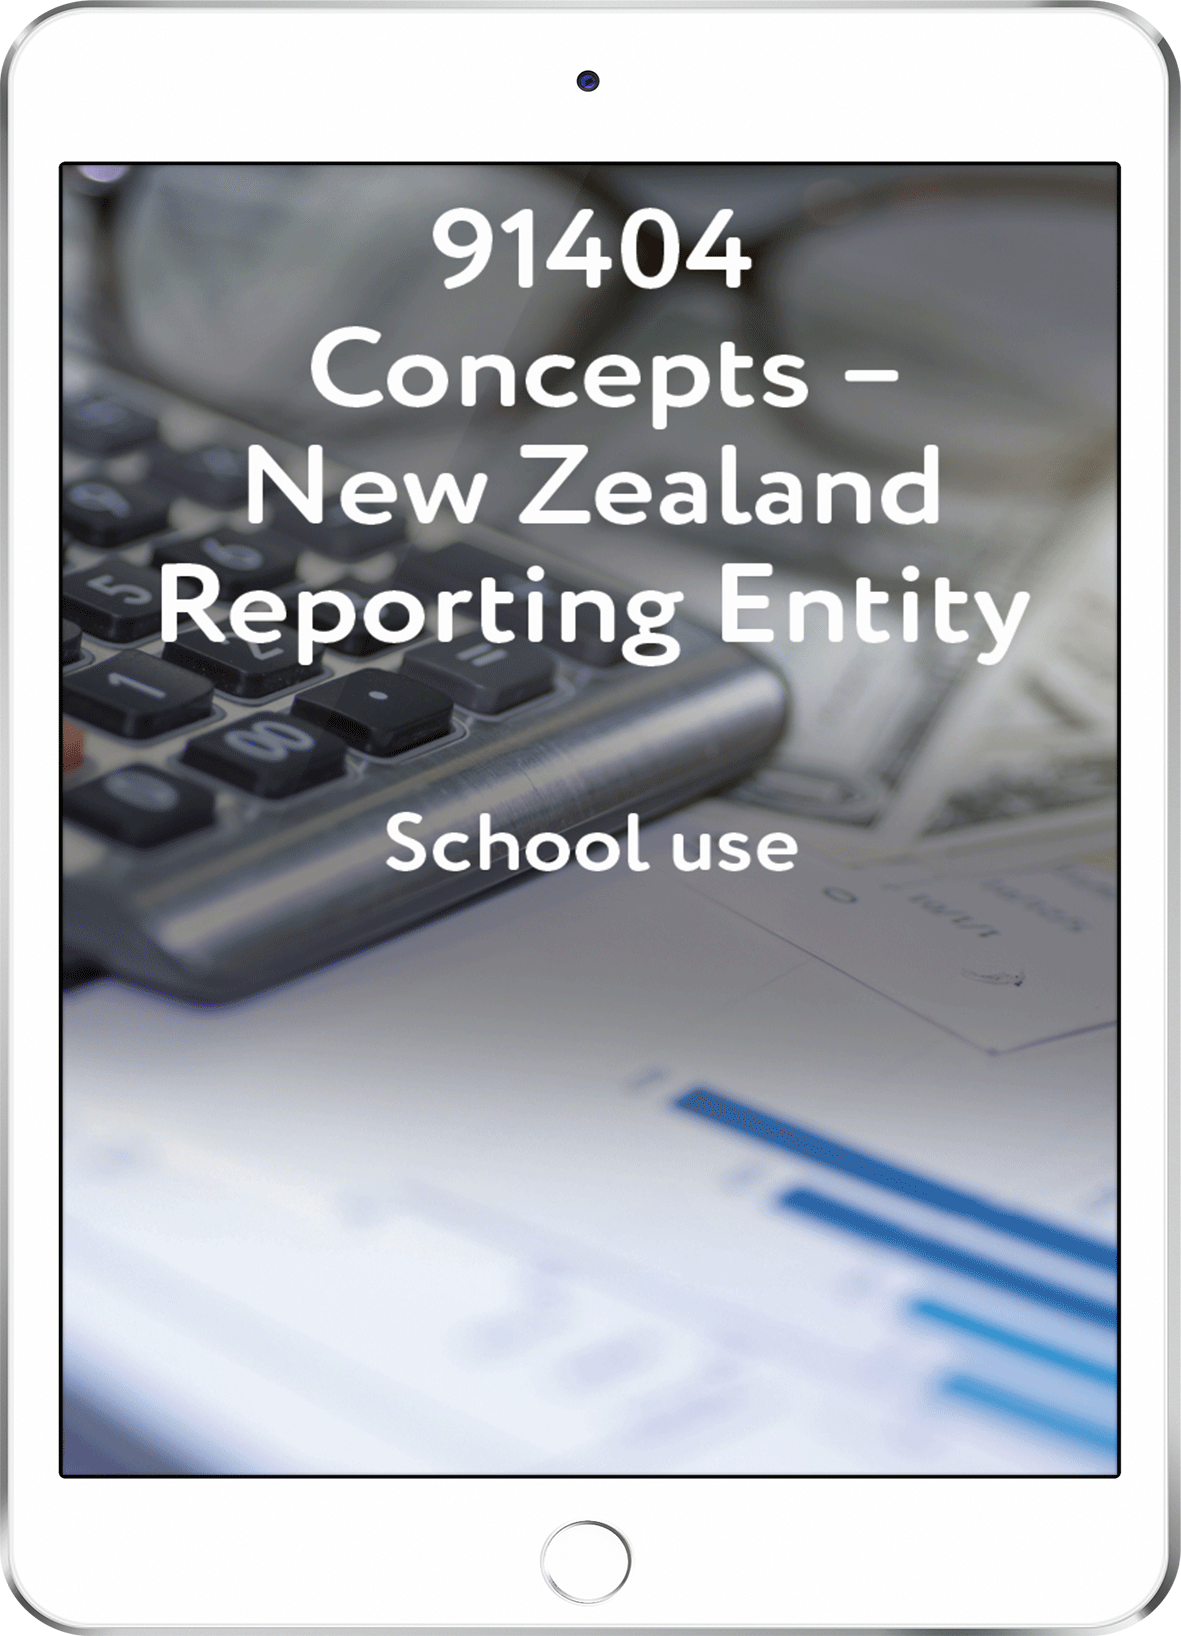 91404 Concepts - NZ Reporting Entity - School Use